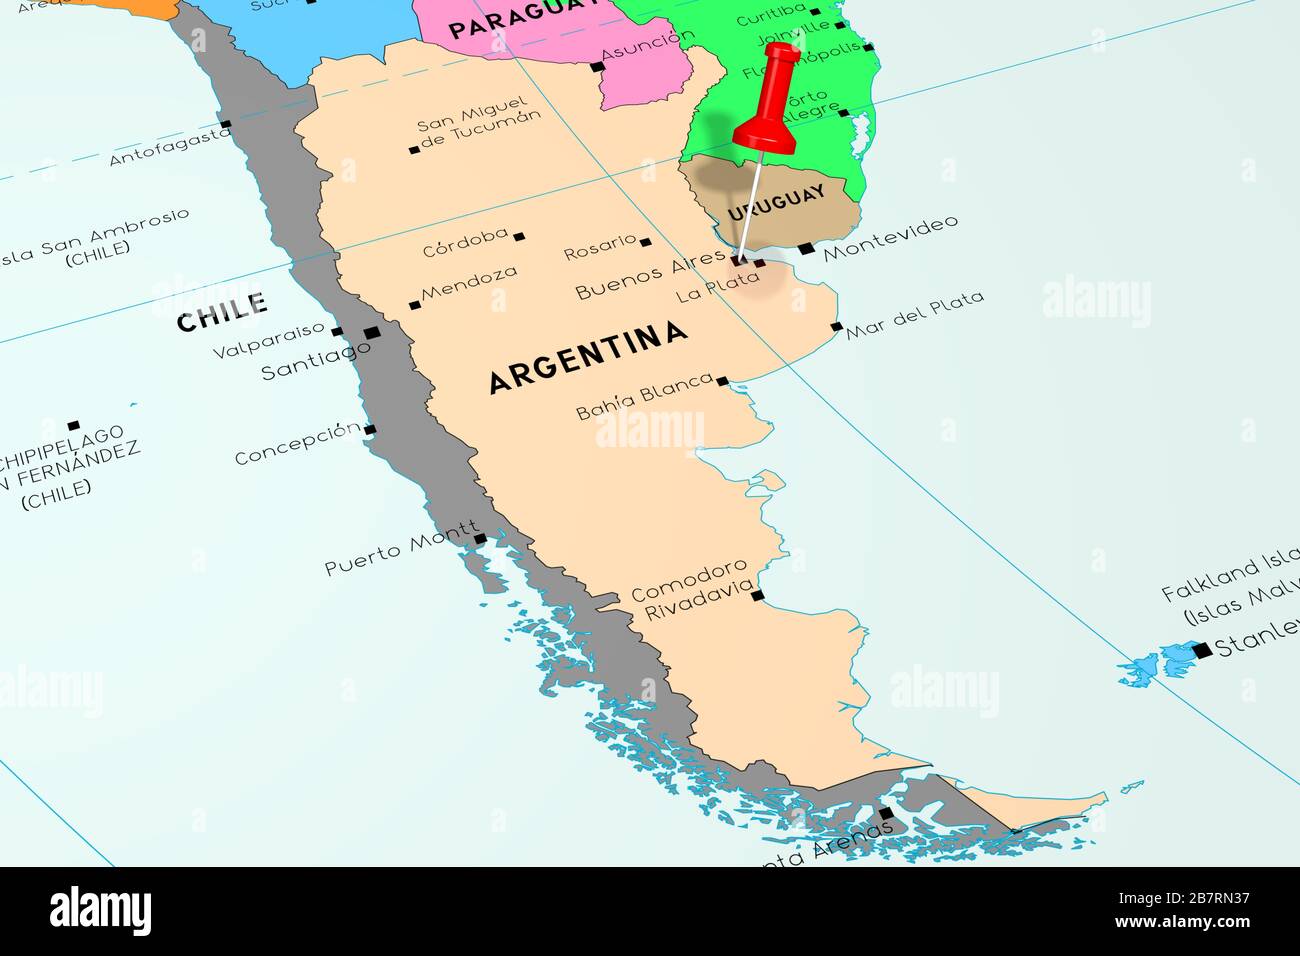 Argentina, Buenos Aires - capital city, pinned on political map Stock Photo